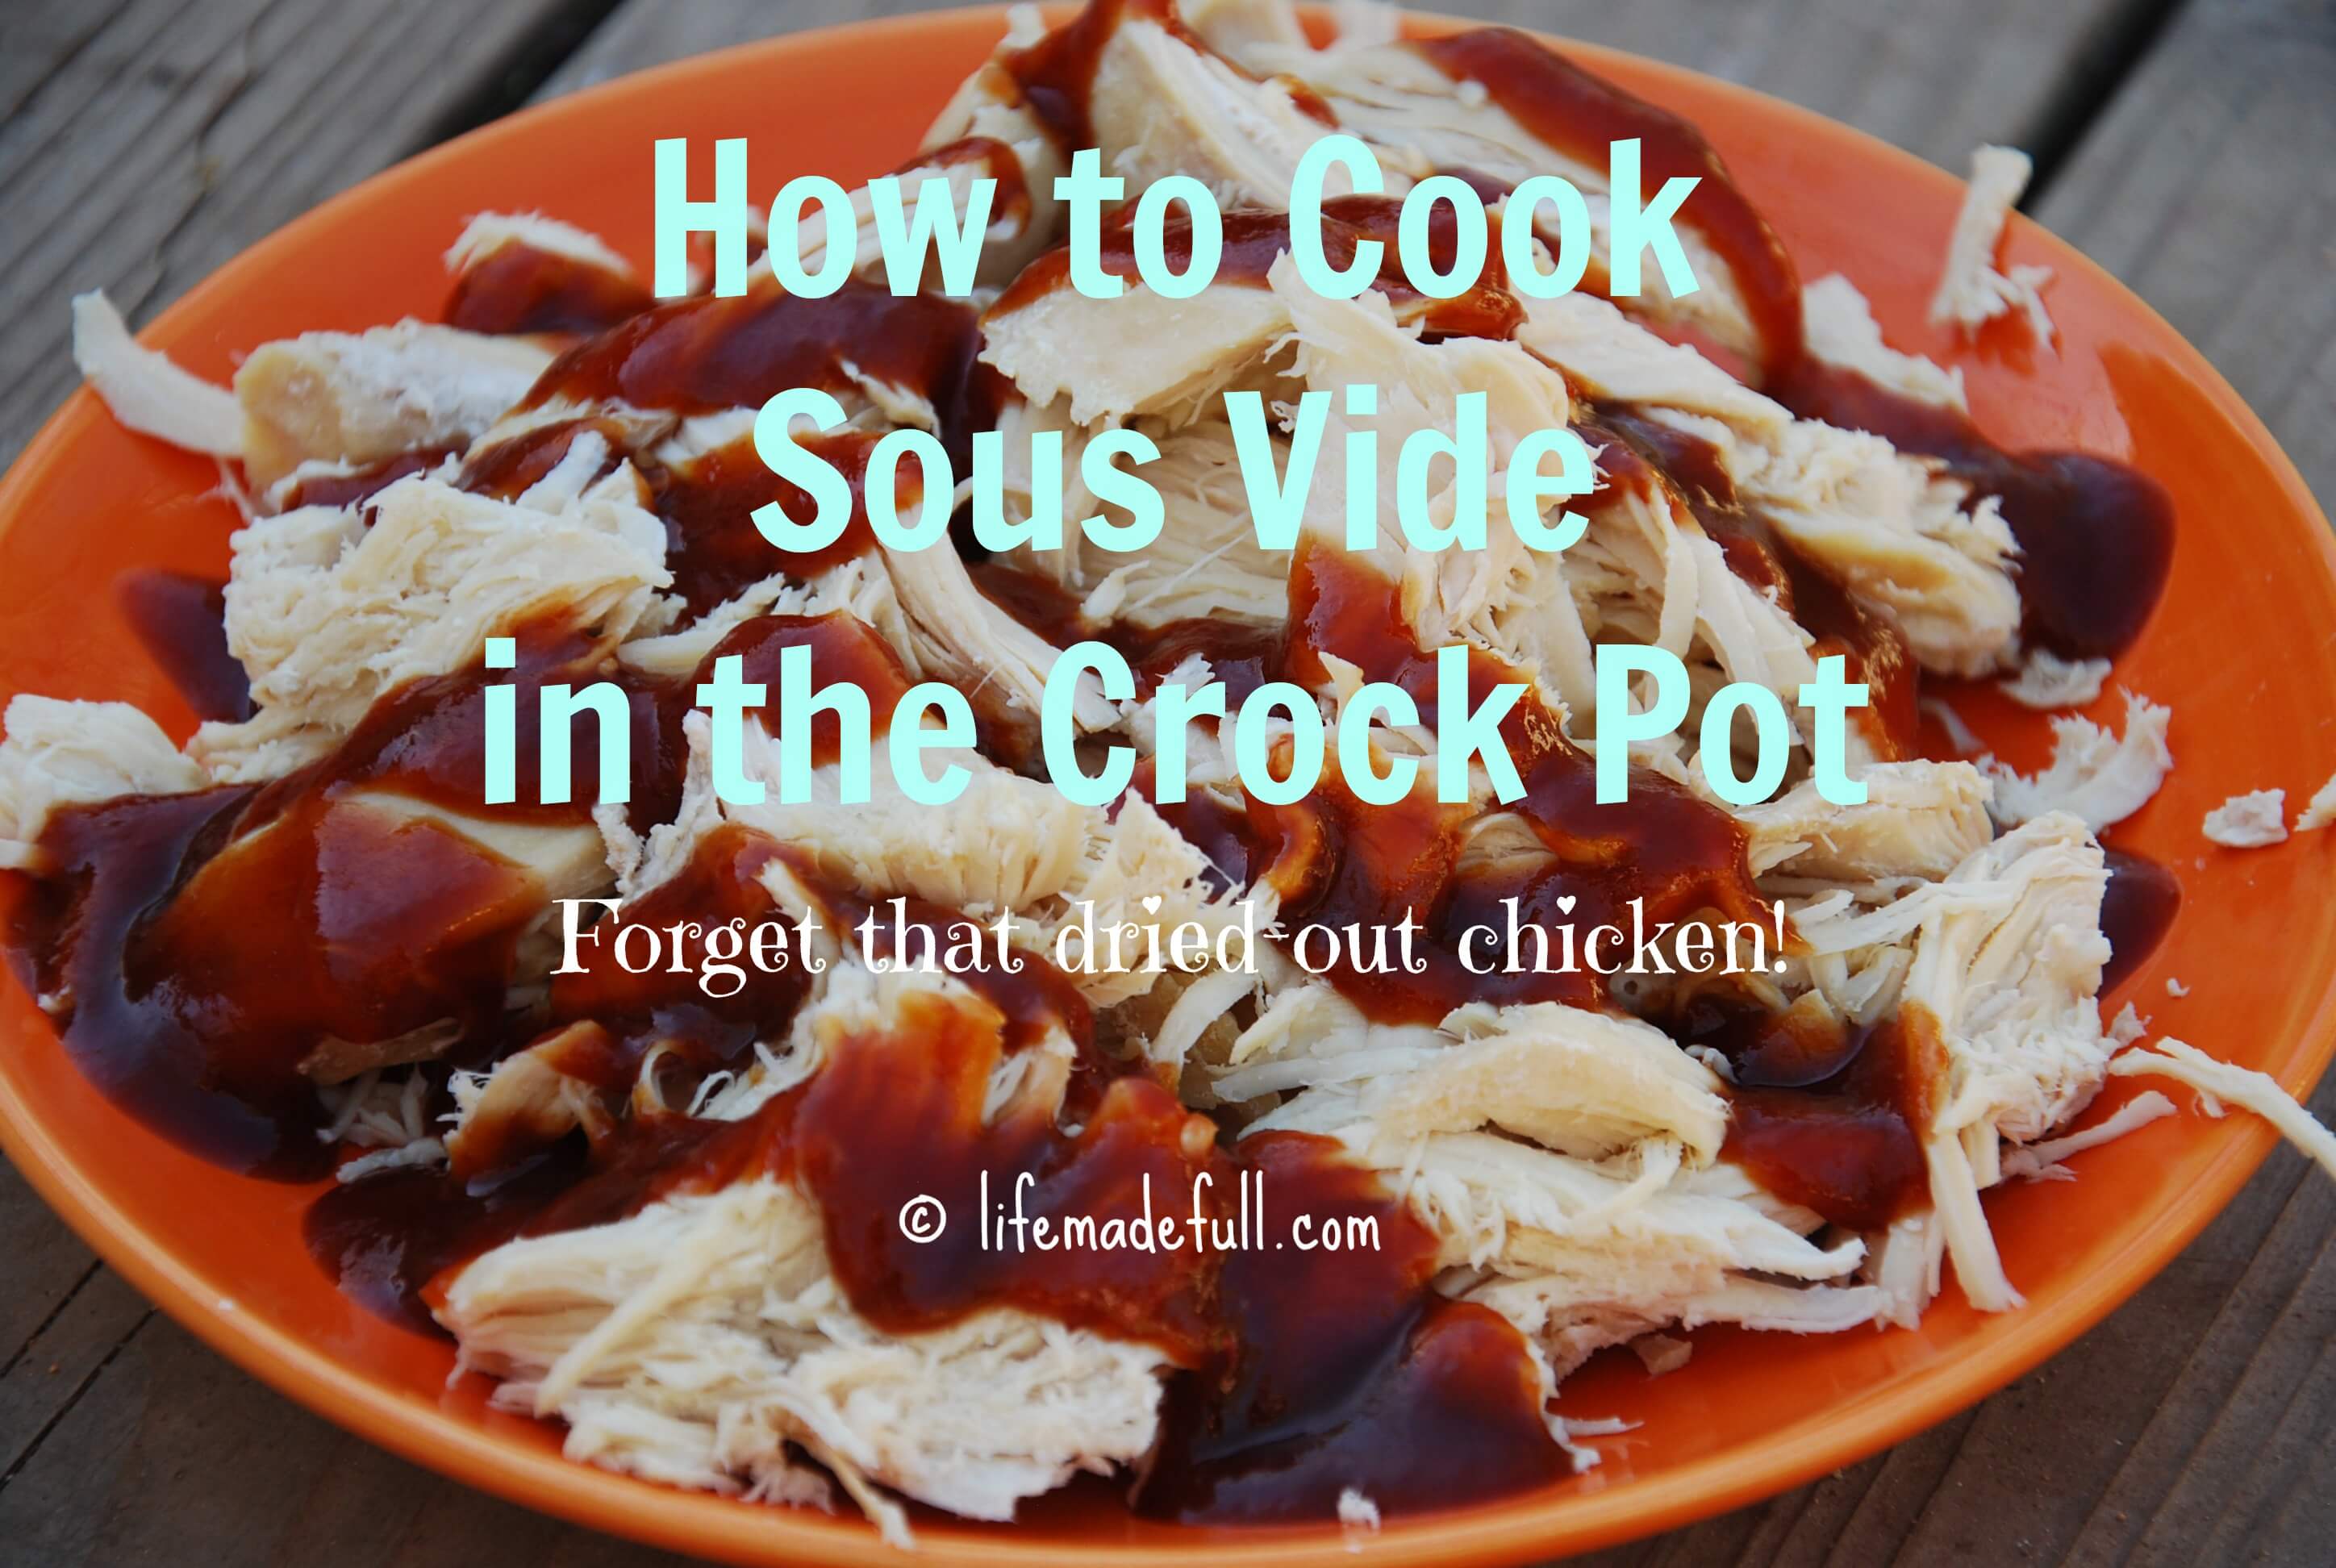 How to Cook Sous Vide in the Crockpot